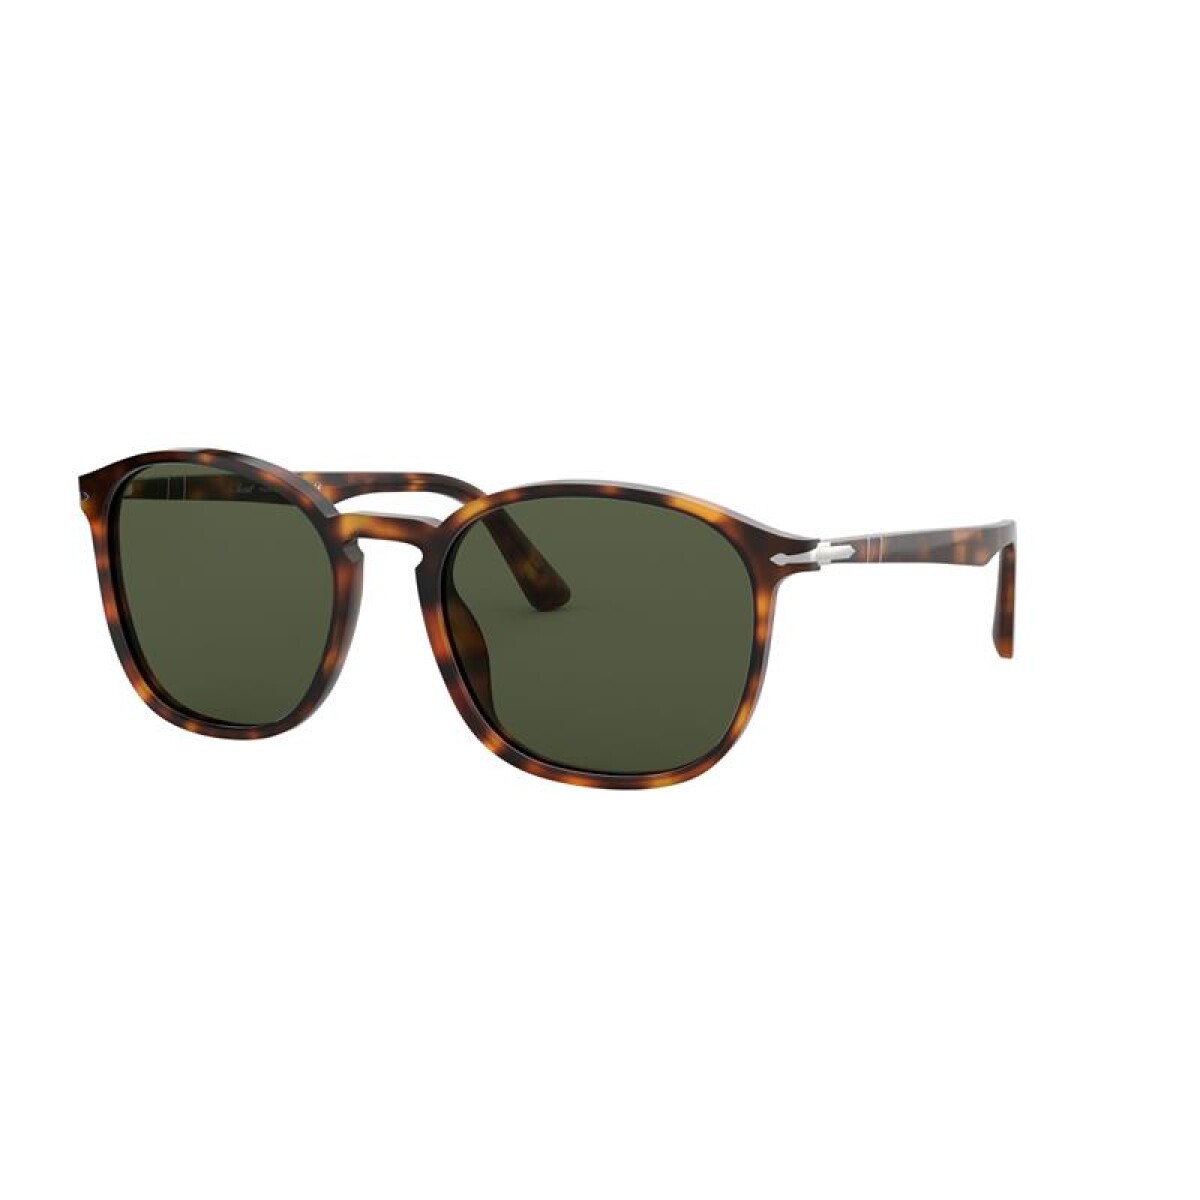 Persol 3215-s - 24/31 